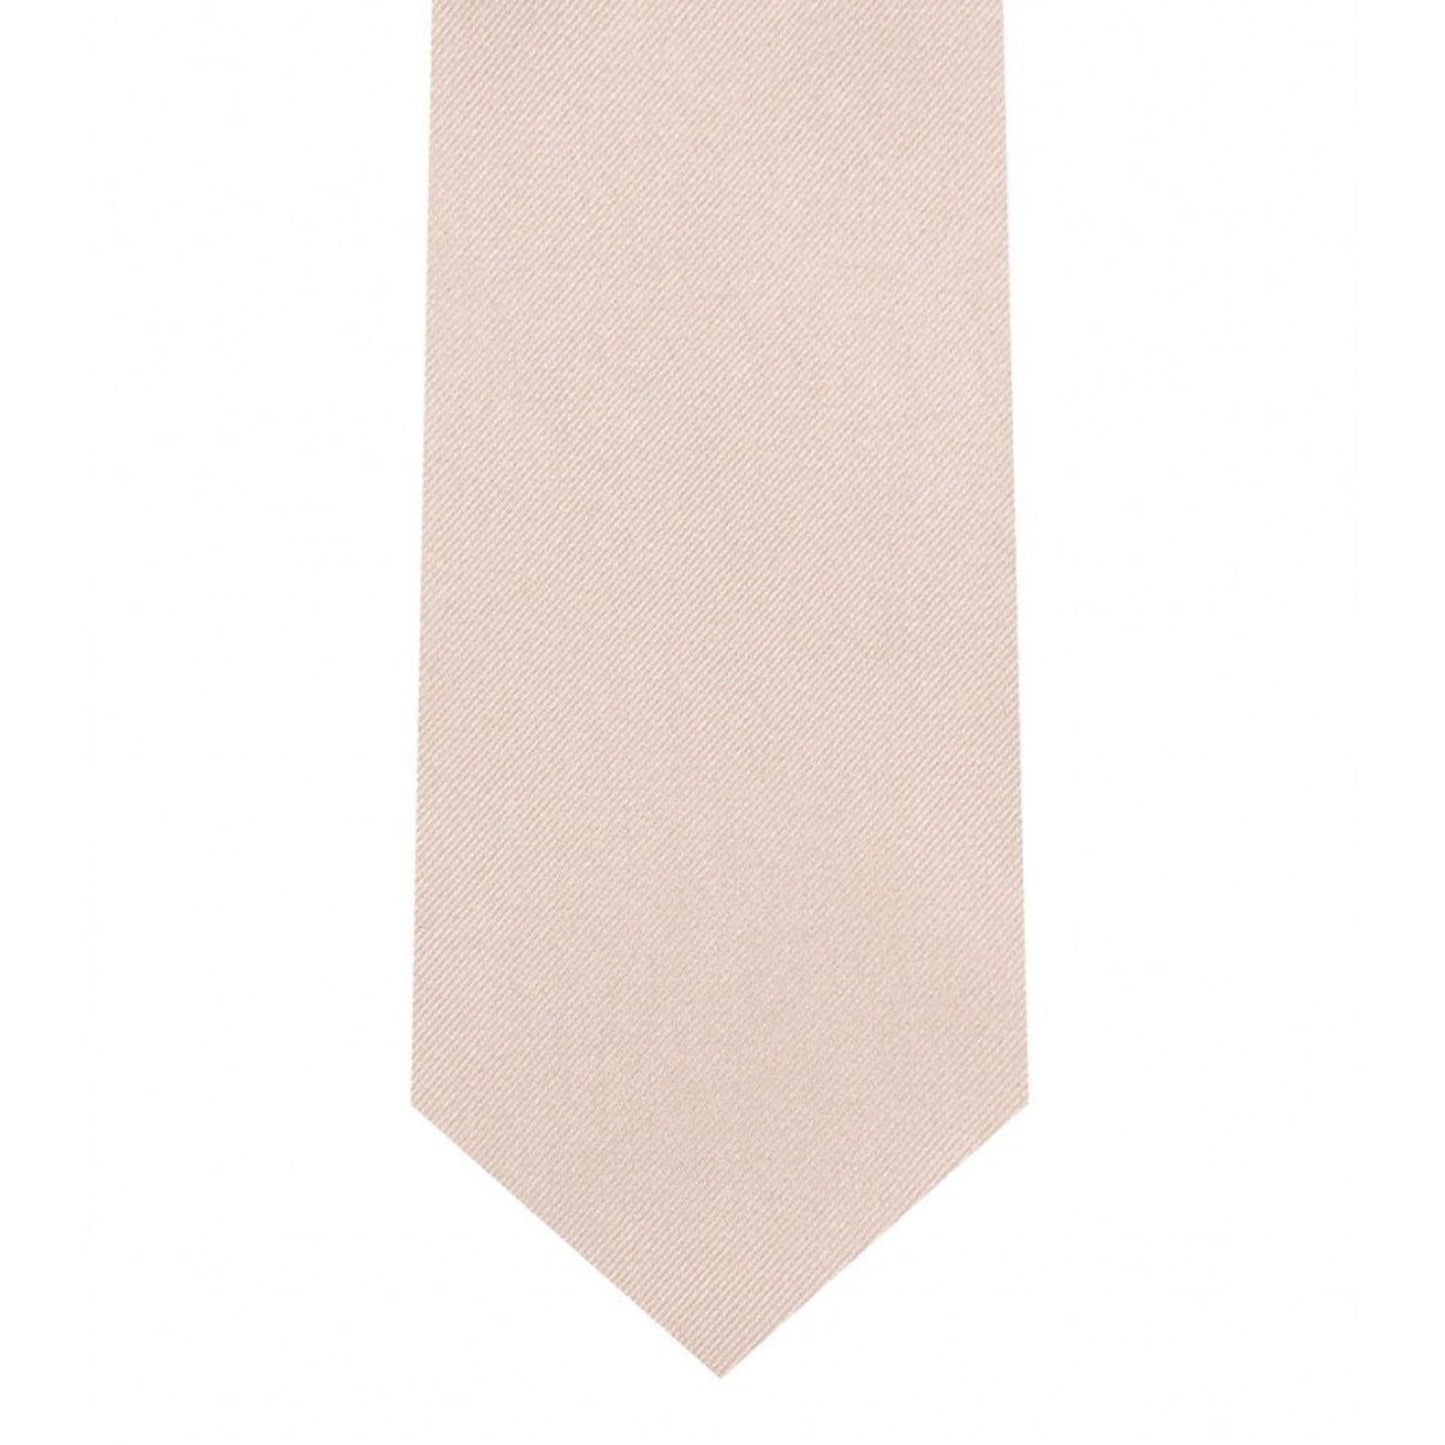 Classic Light BlushTie Skinny width 2.75 inches With Matching Pocket Square | KCT Menswear